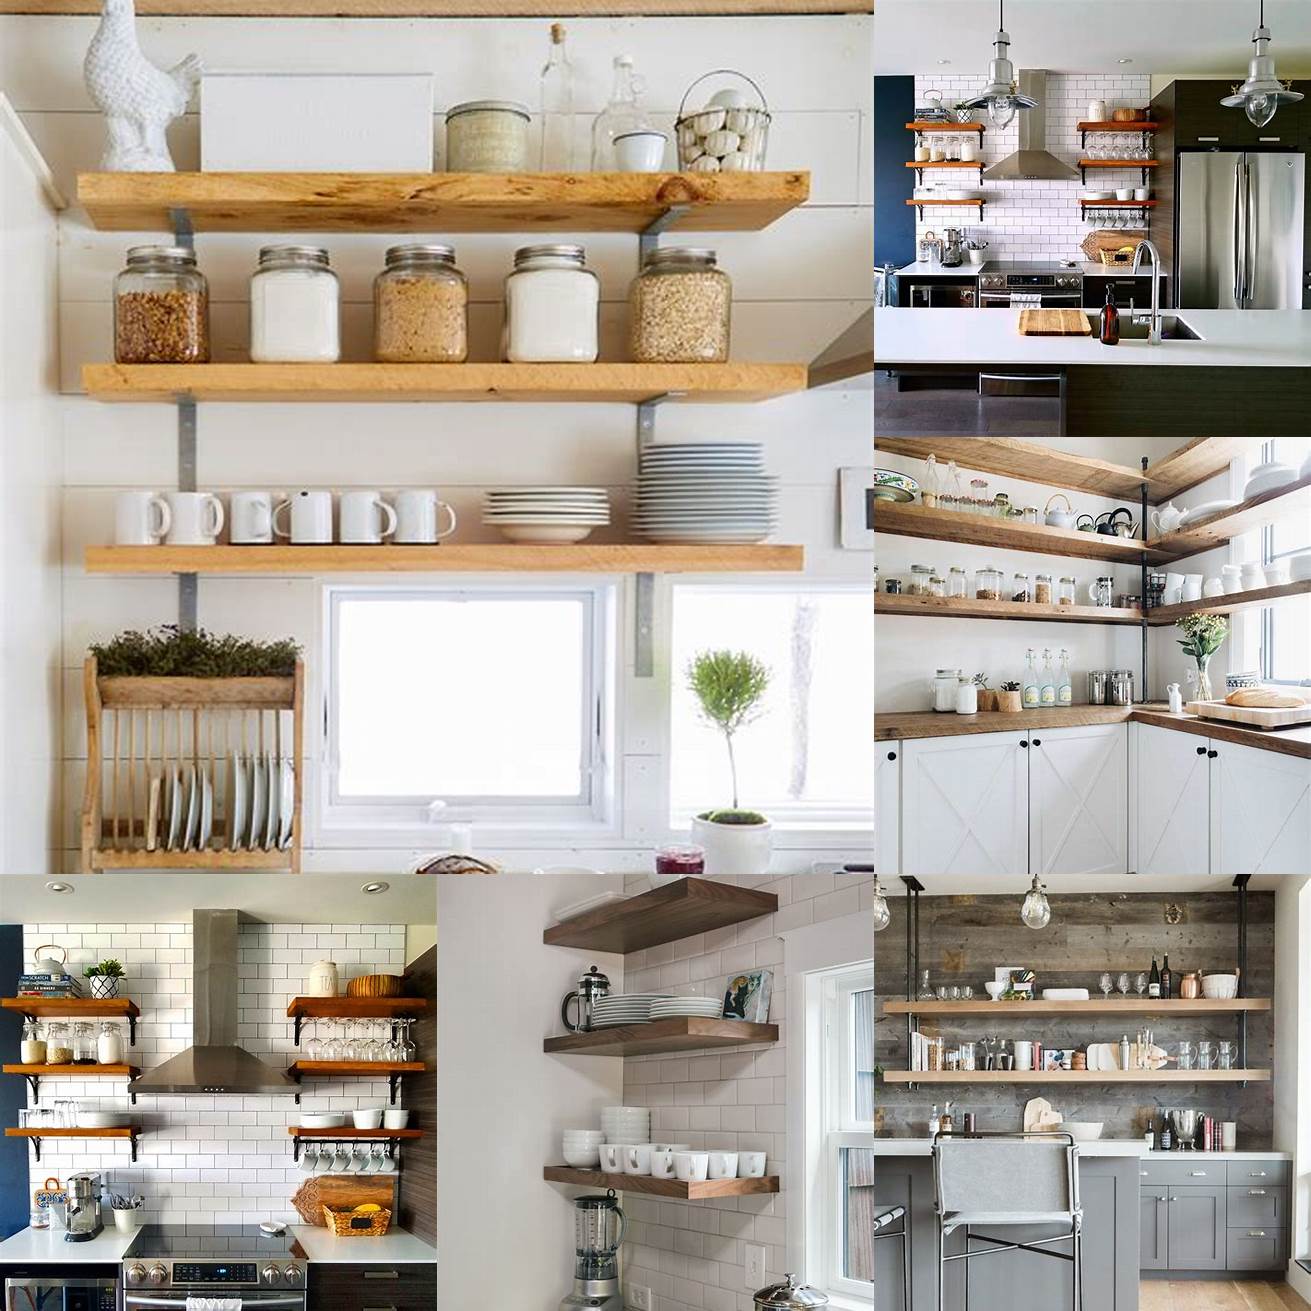 Add open shelving to your kitchen to create a more open and airy feel